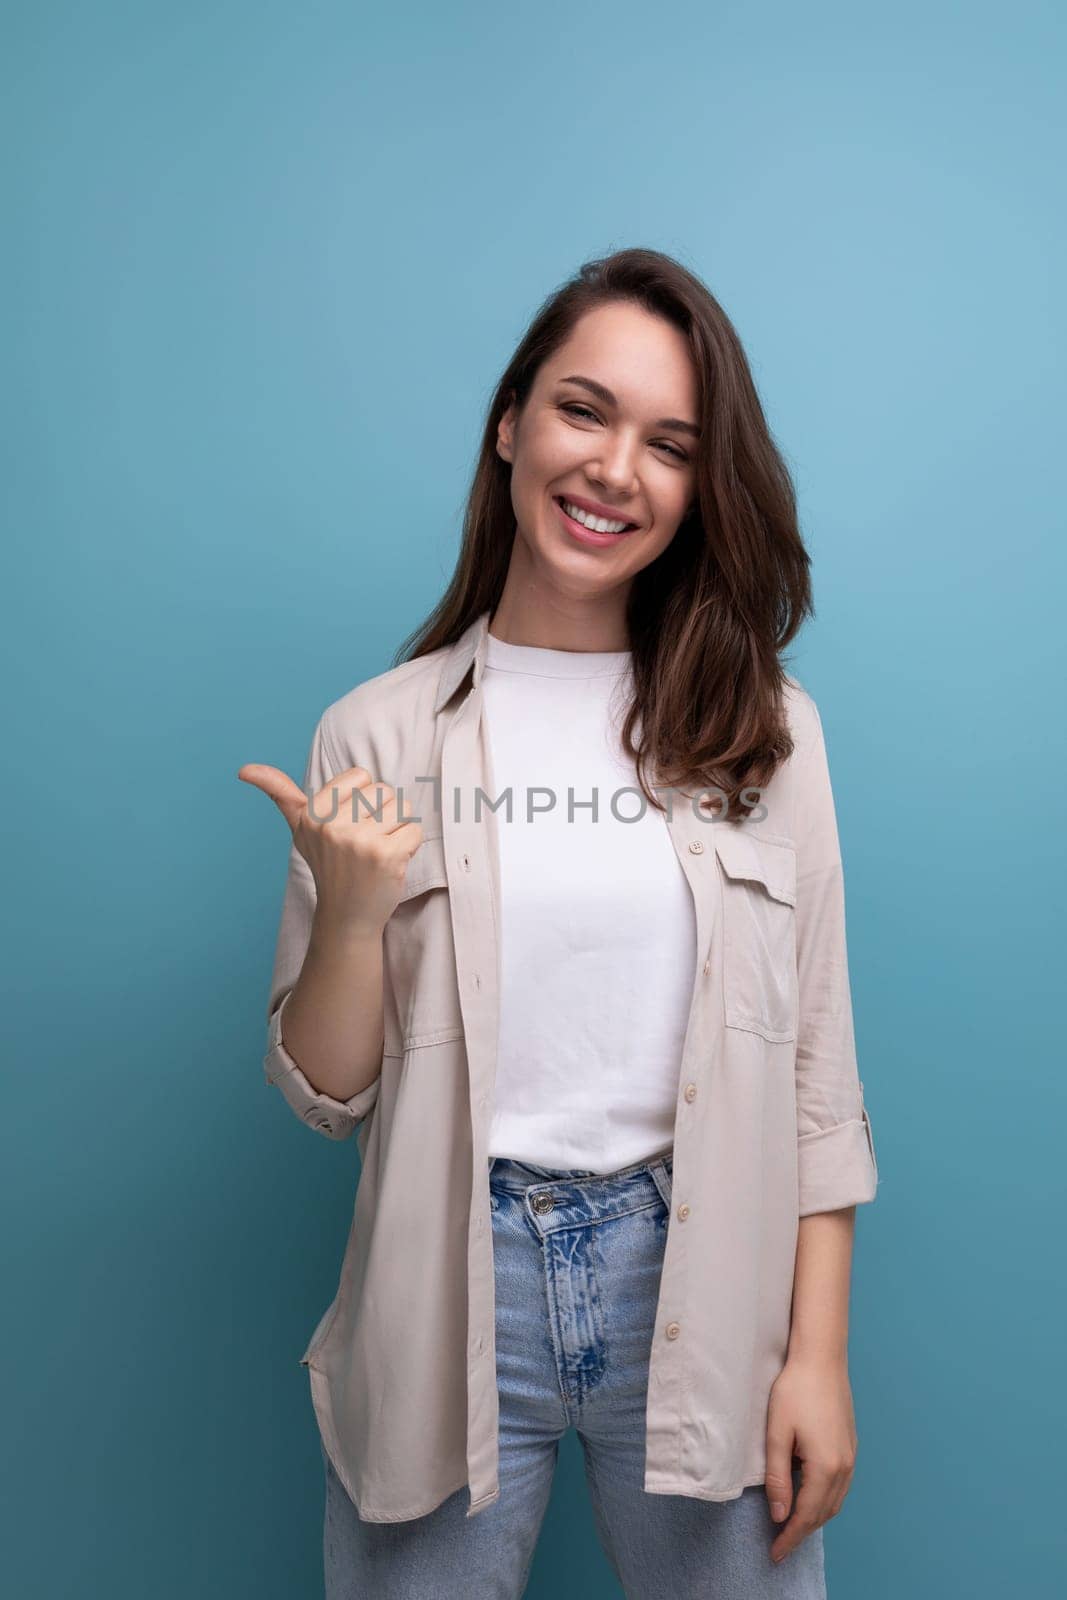 smiling brunette young woman in shirt and jeans on blue background.